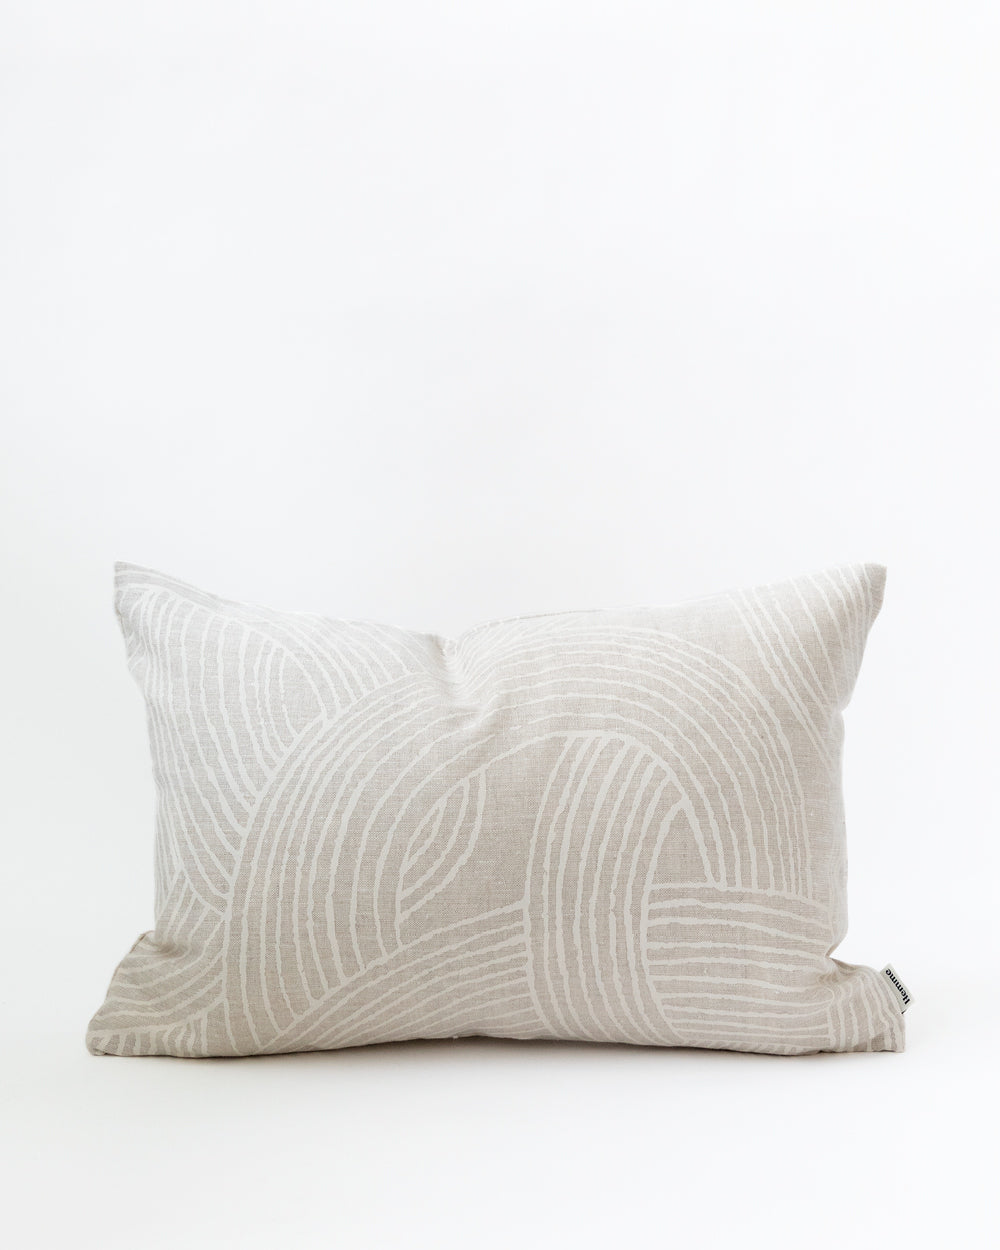 Ophelia Pillow Cover, Natural